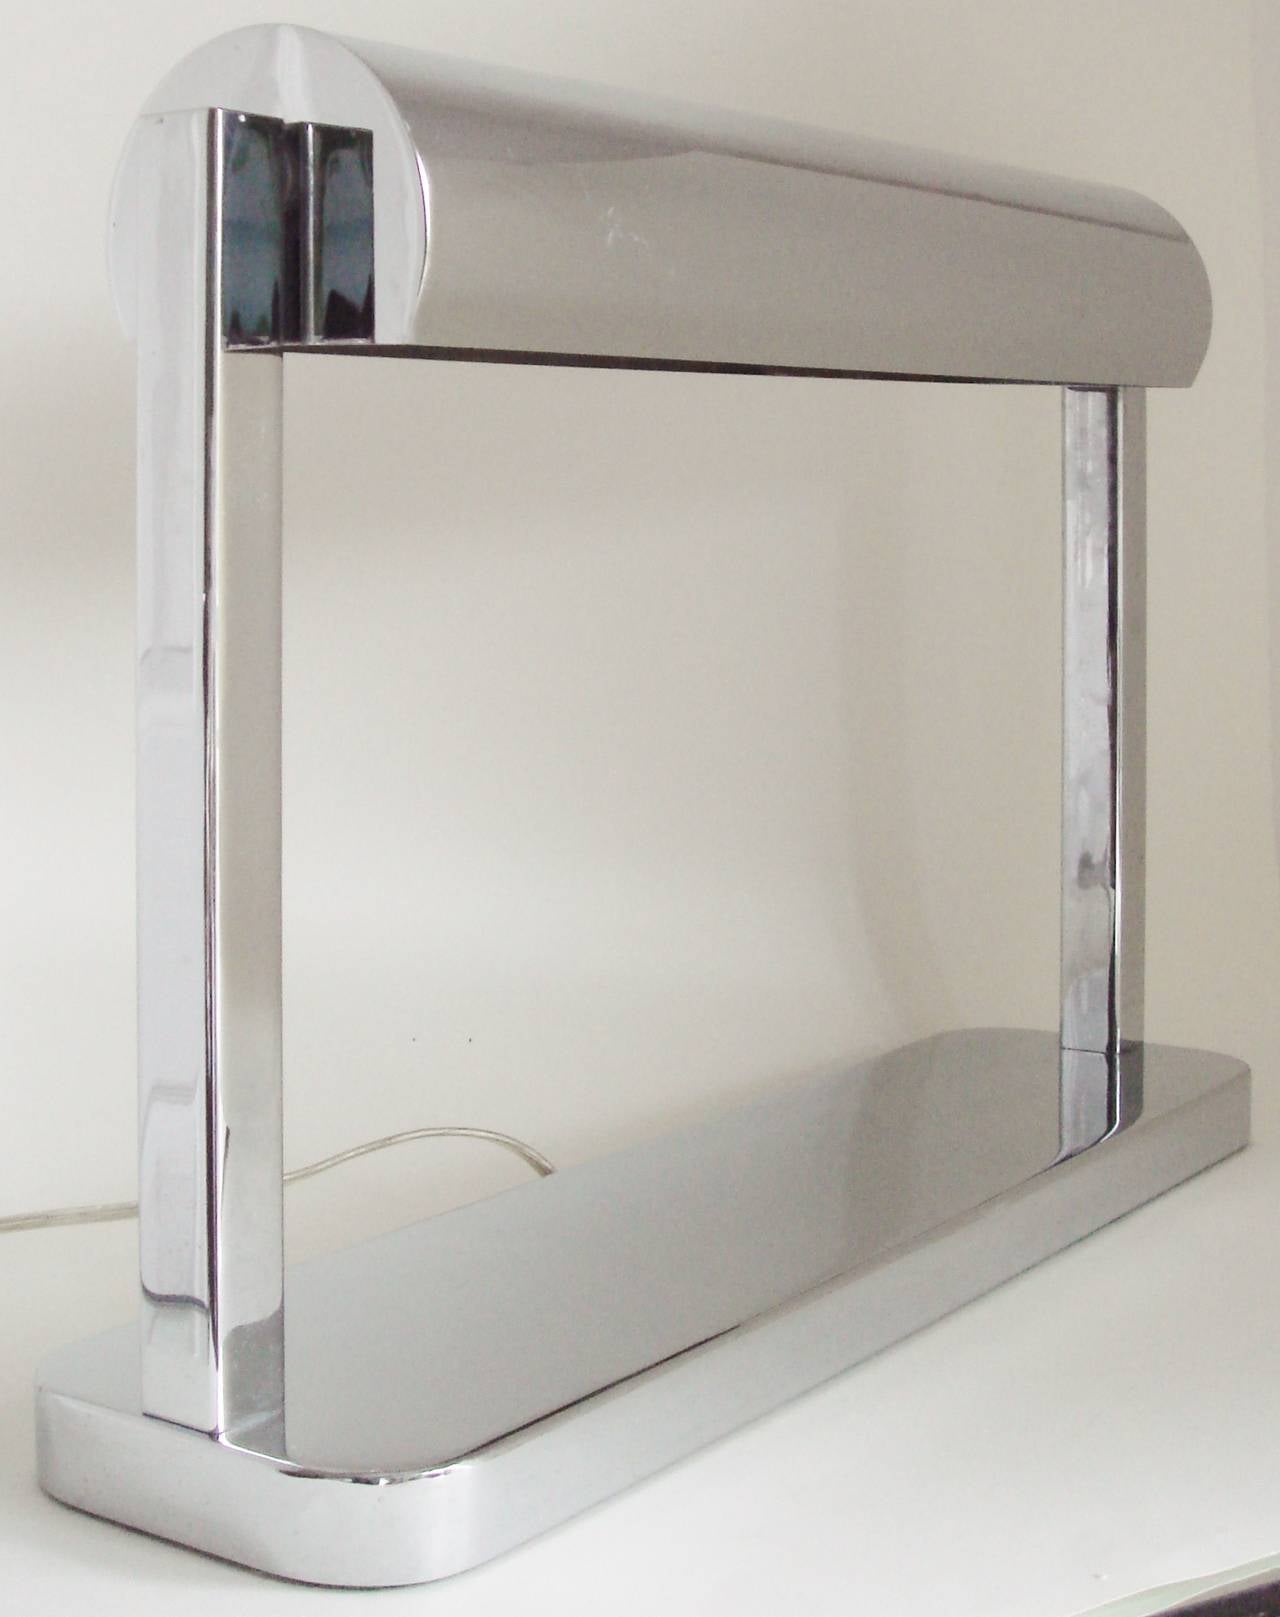 This very simply designed, large architectural and extremely striking American Art Deco Revival chrome adjustable banker's desk lamp is in wonderful condition. The tubular shade can be adjusted through almost 360 degrees and houses the two original